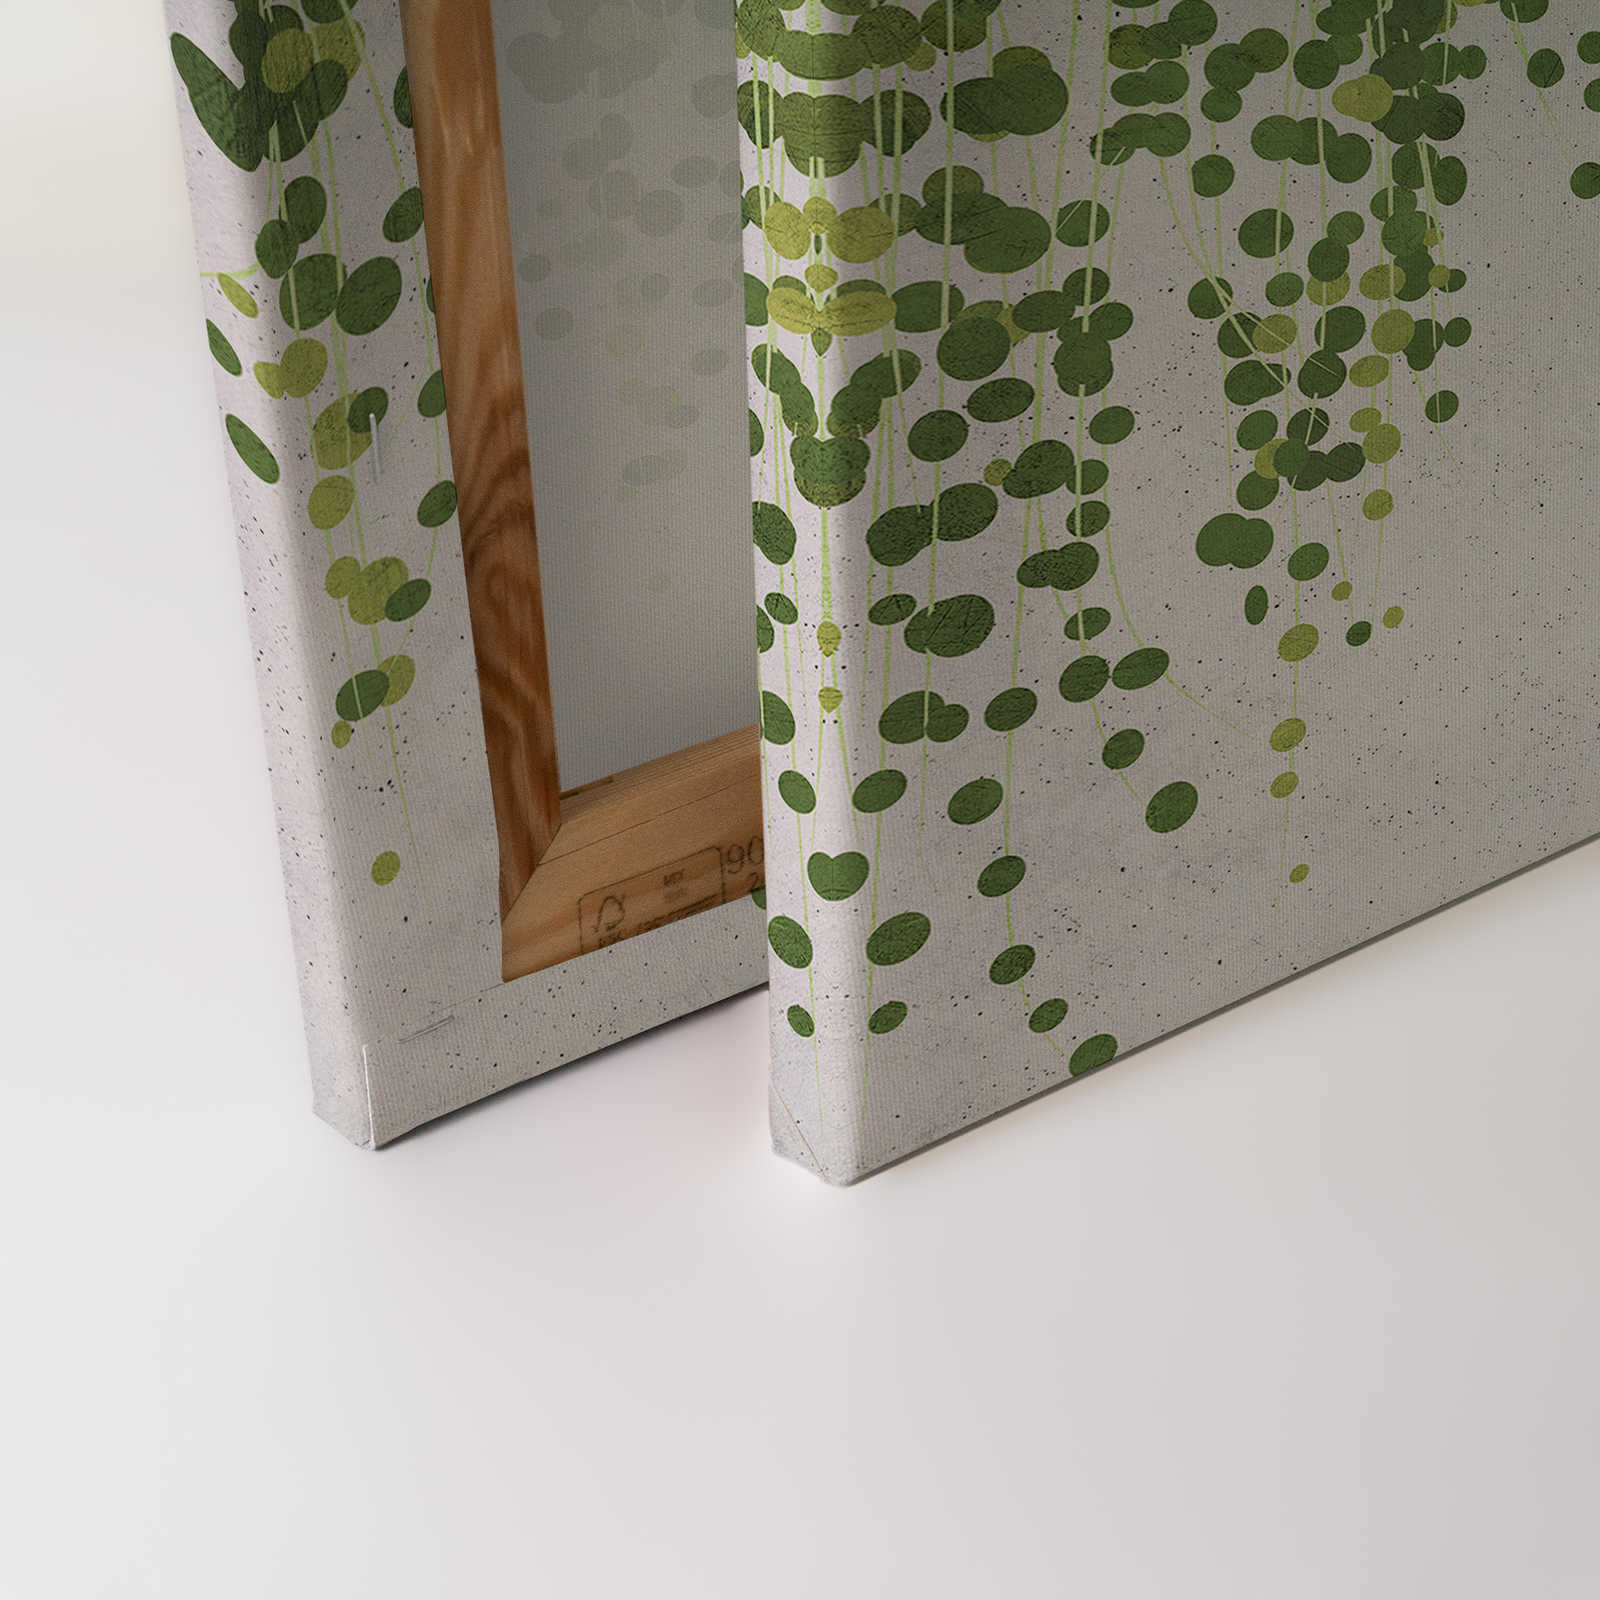             Hanging Garden 1 - Canvas painting Leaves vines, hanging garden in concrete look - 1.20 m x 0.80 m
        